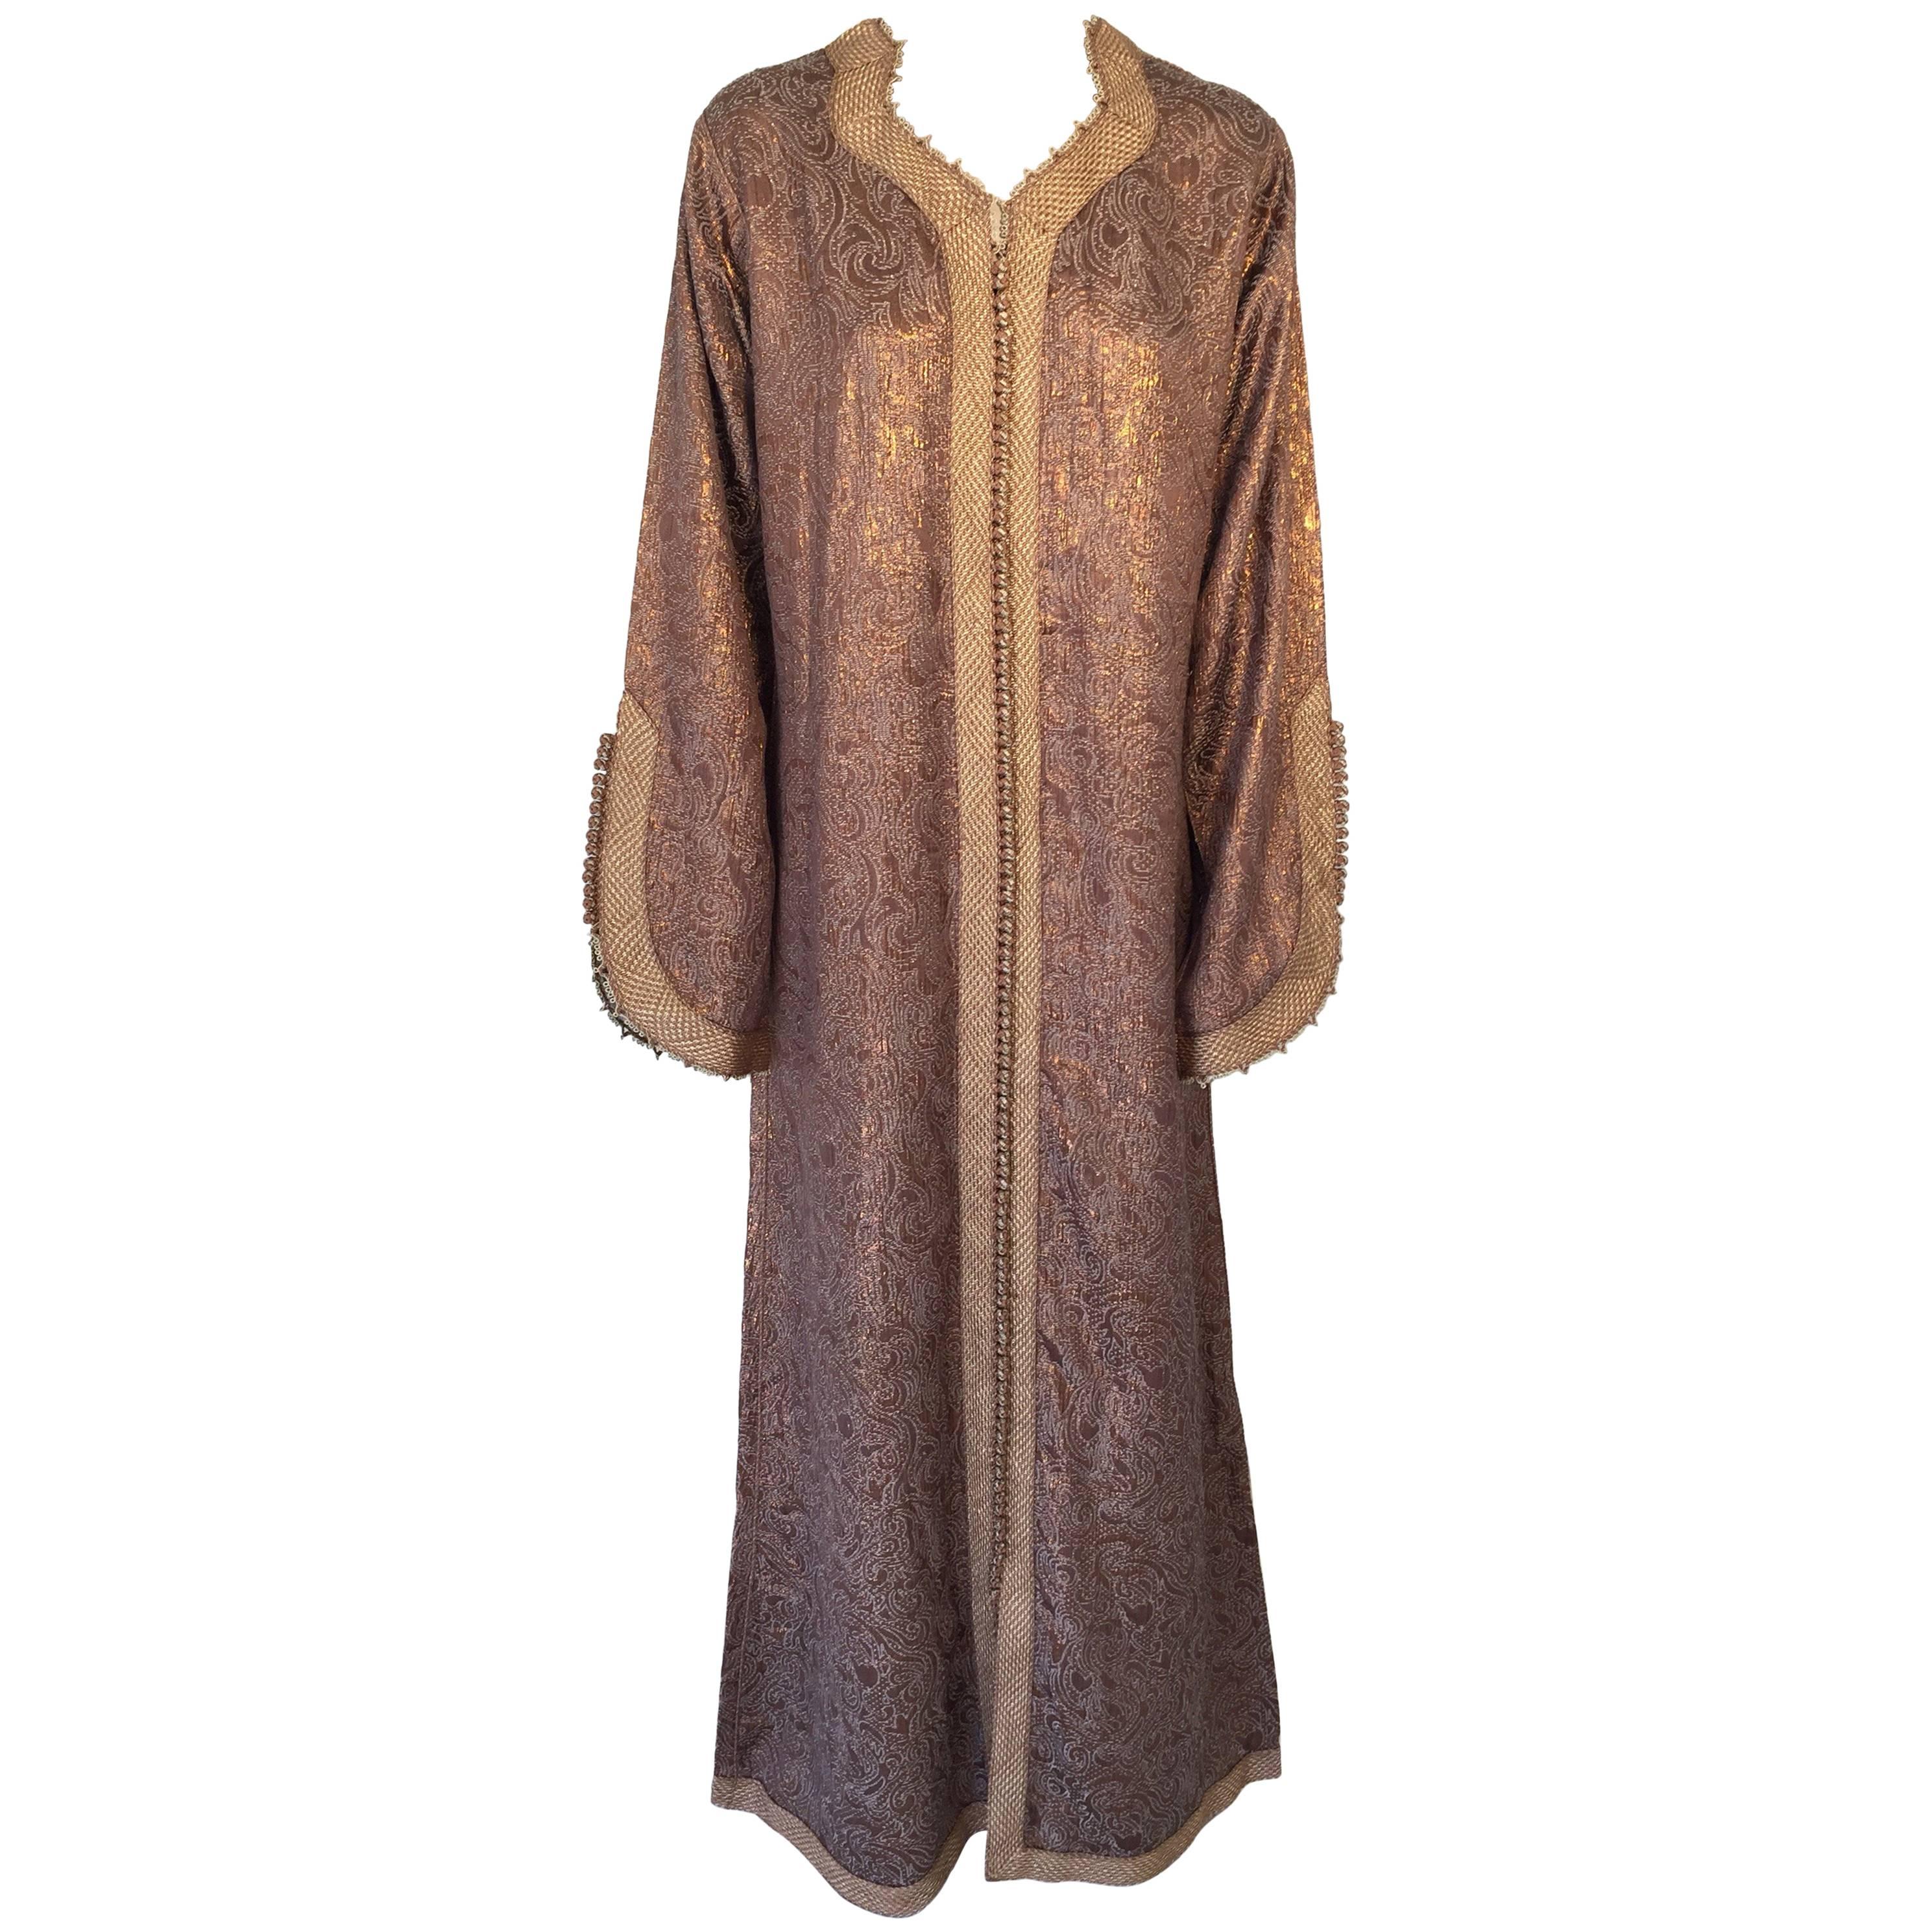 Moroccan Caftan 1970s, North Africa, Morocco Metallic Bronze and Gold Color